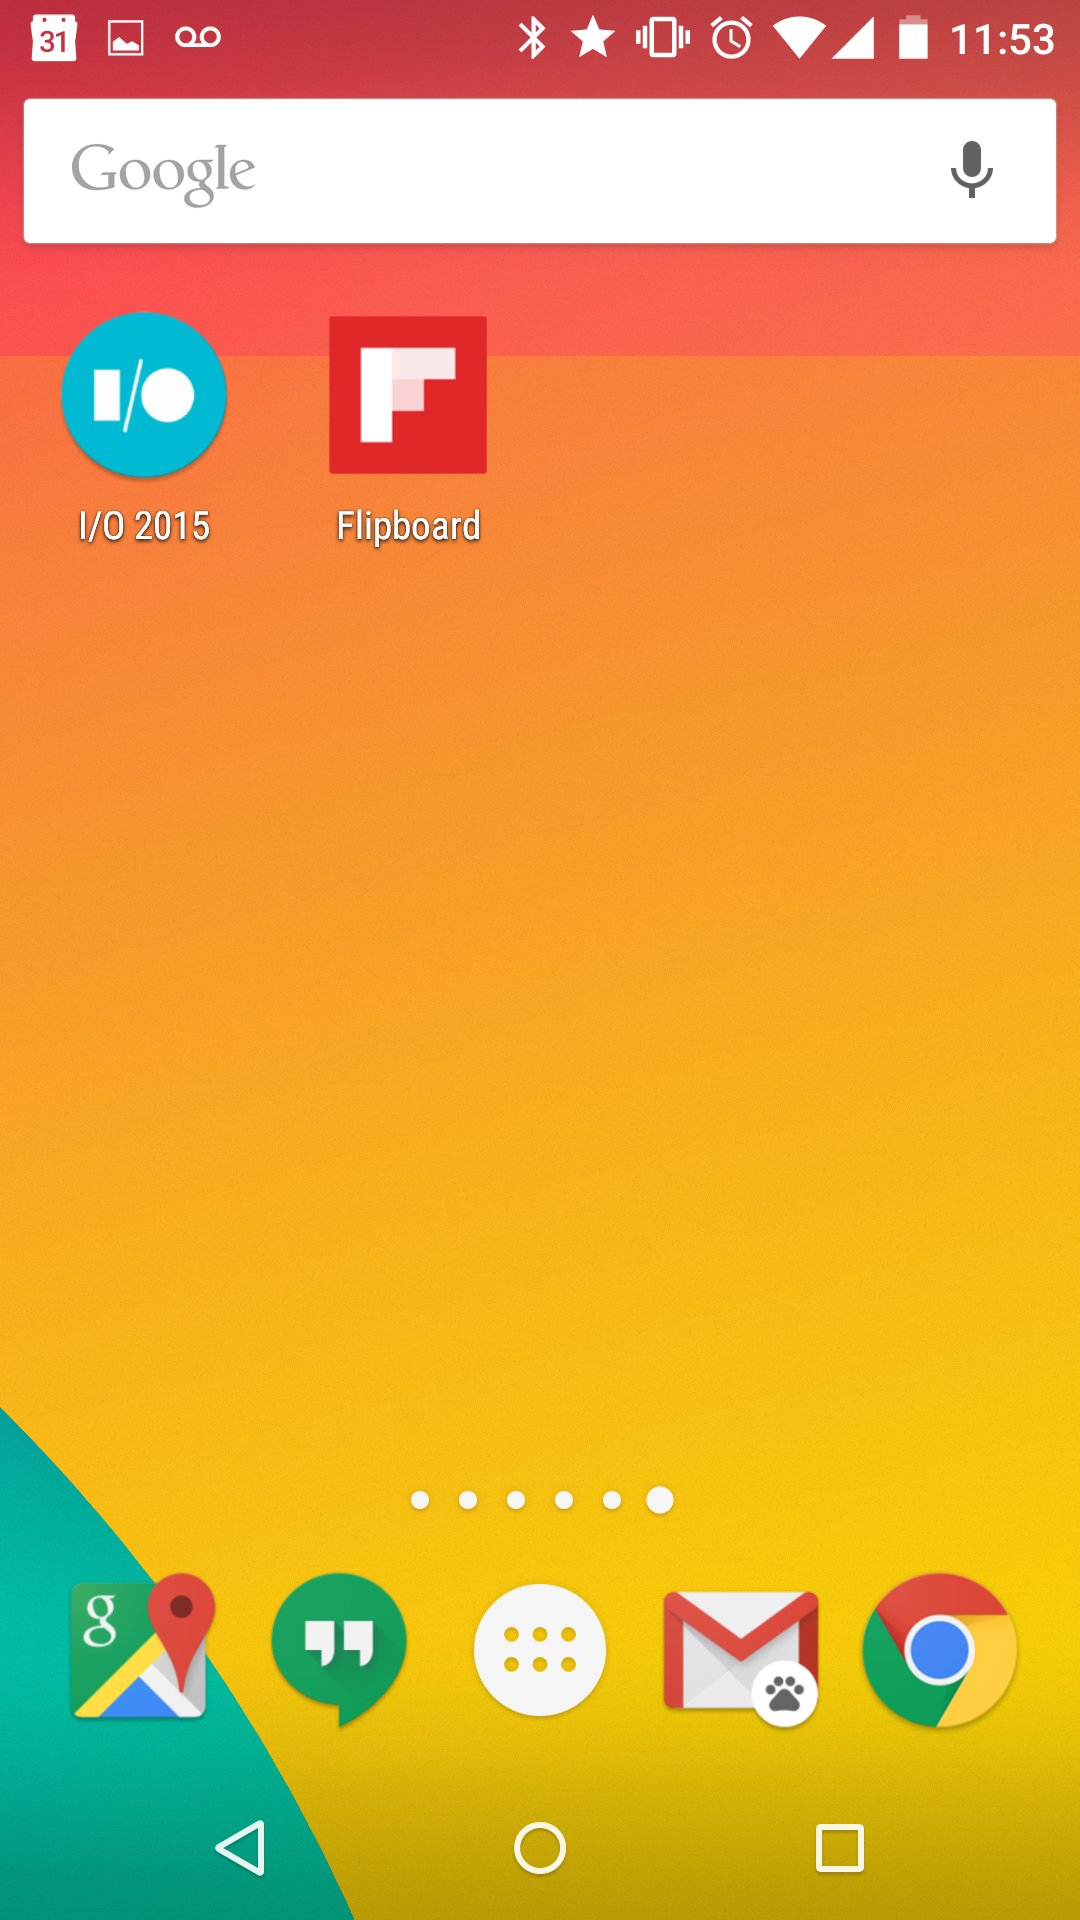 The app shortcut appears on the homescreen or launcher of the OS.